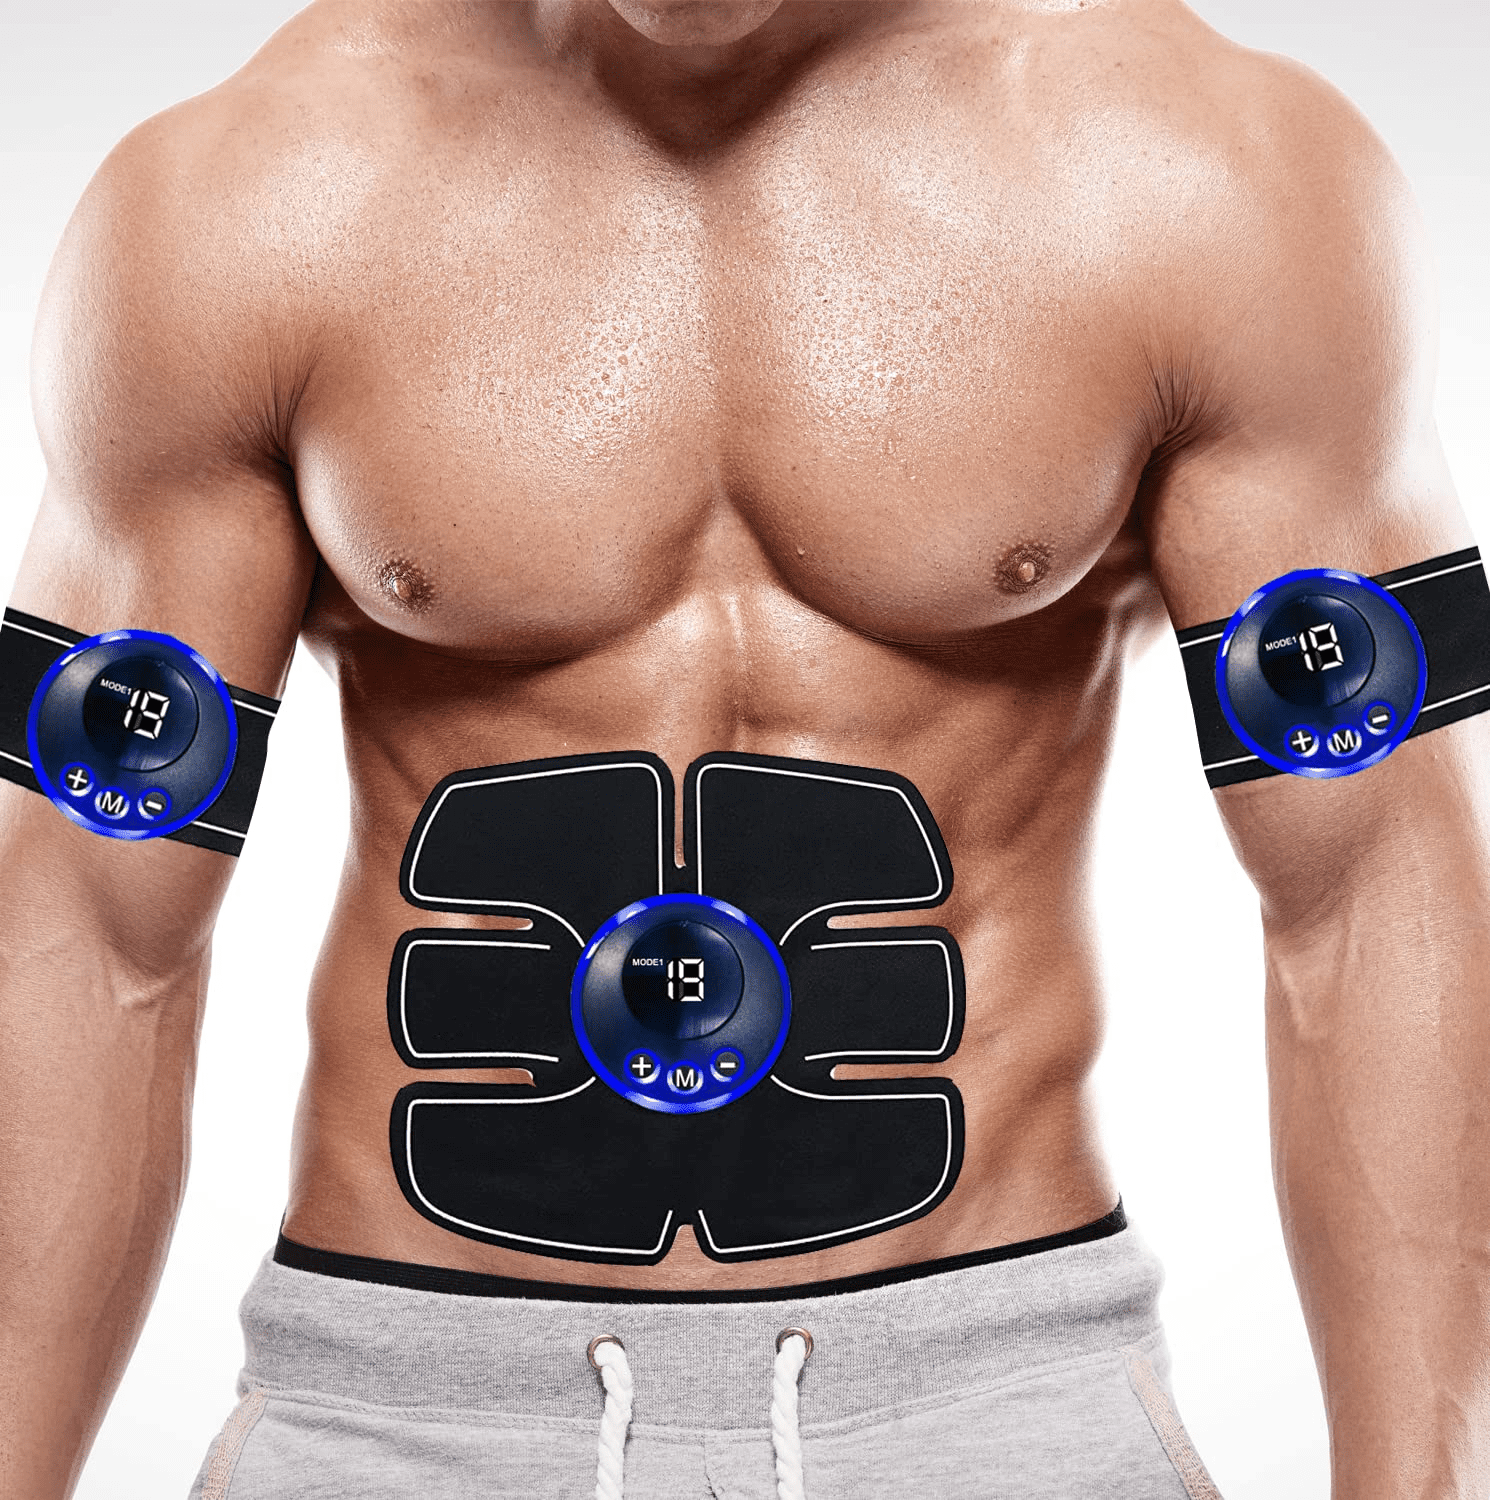 Do Abs Muscle Stimulators Really Work? – Armageddon Sports